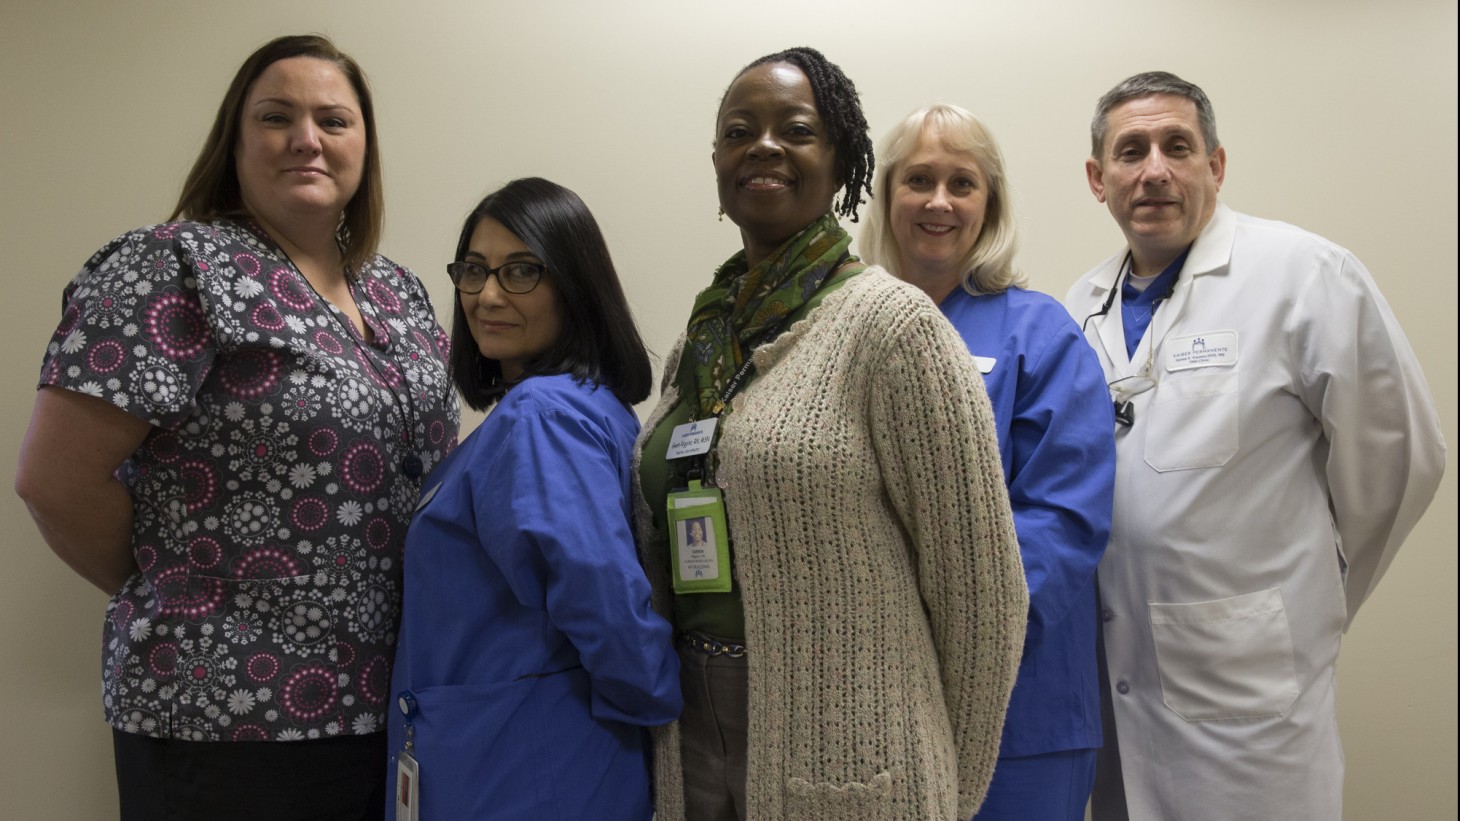 A group of health care workers posing together 